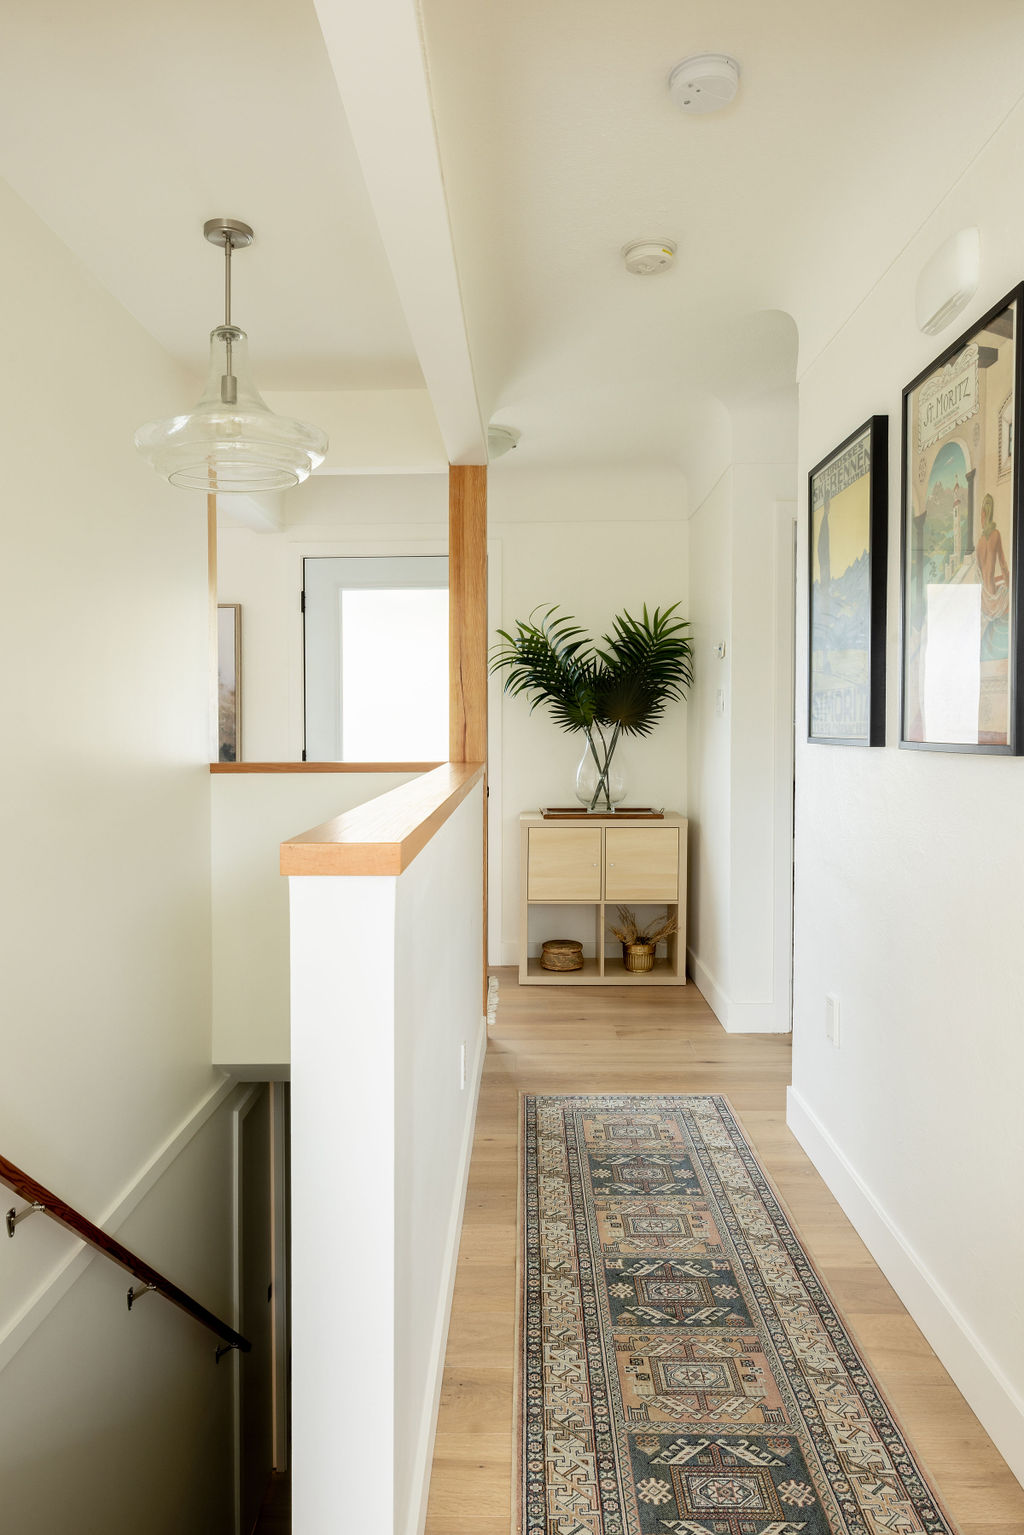 Hall and staircase in modern home